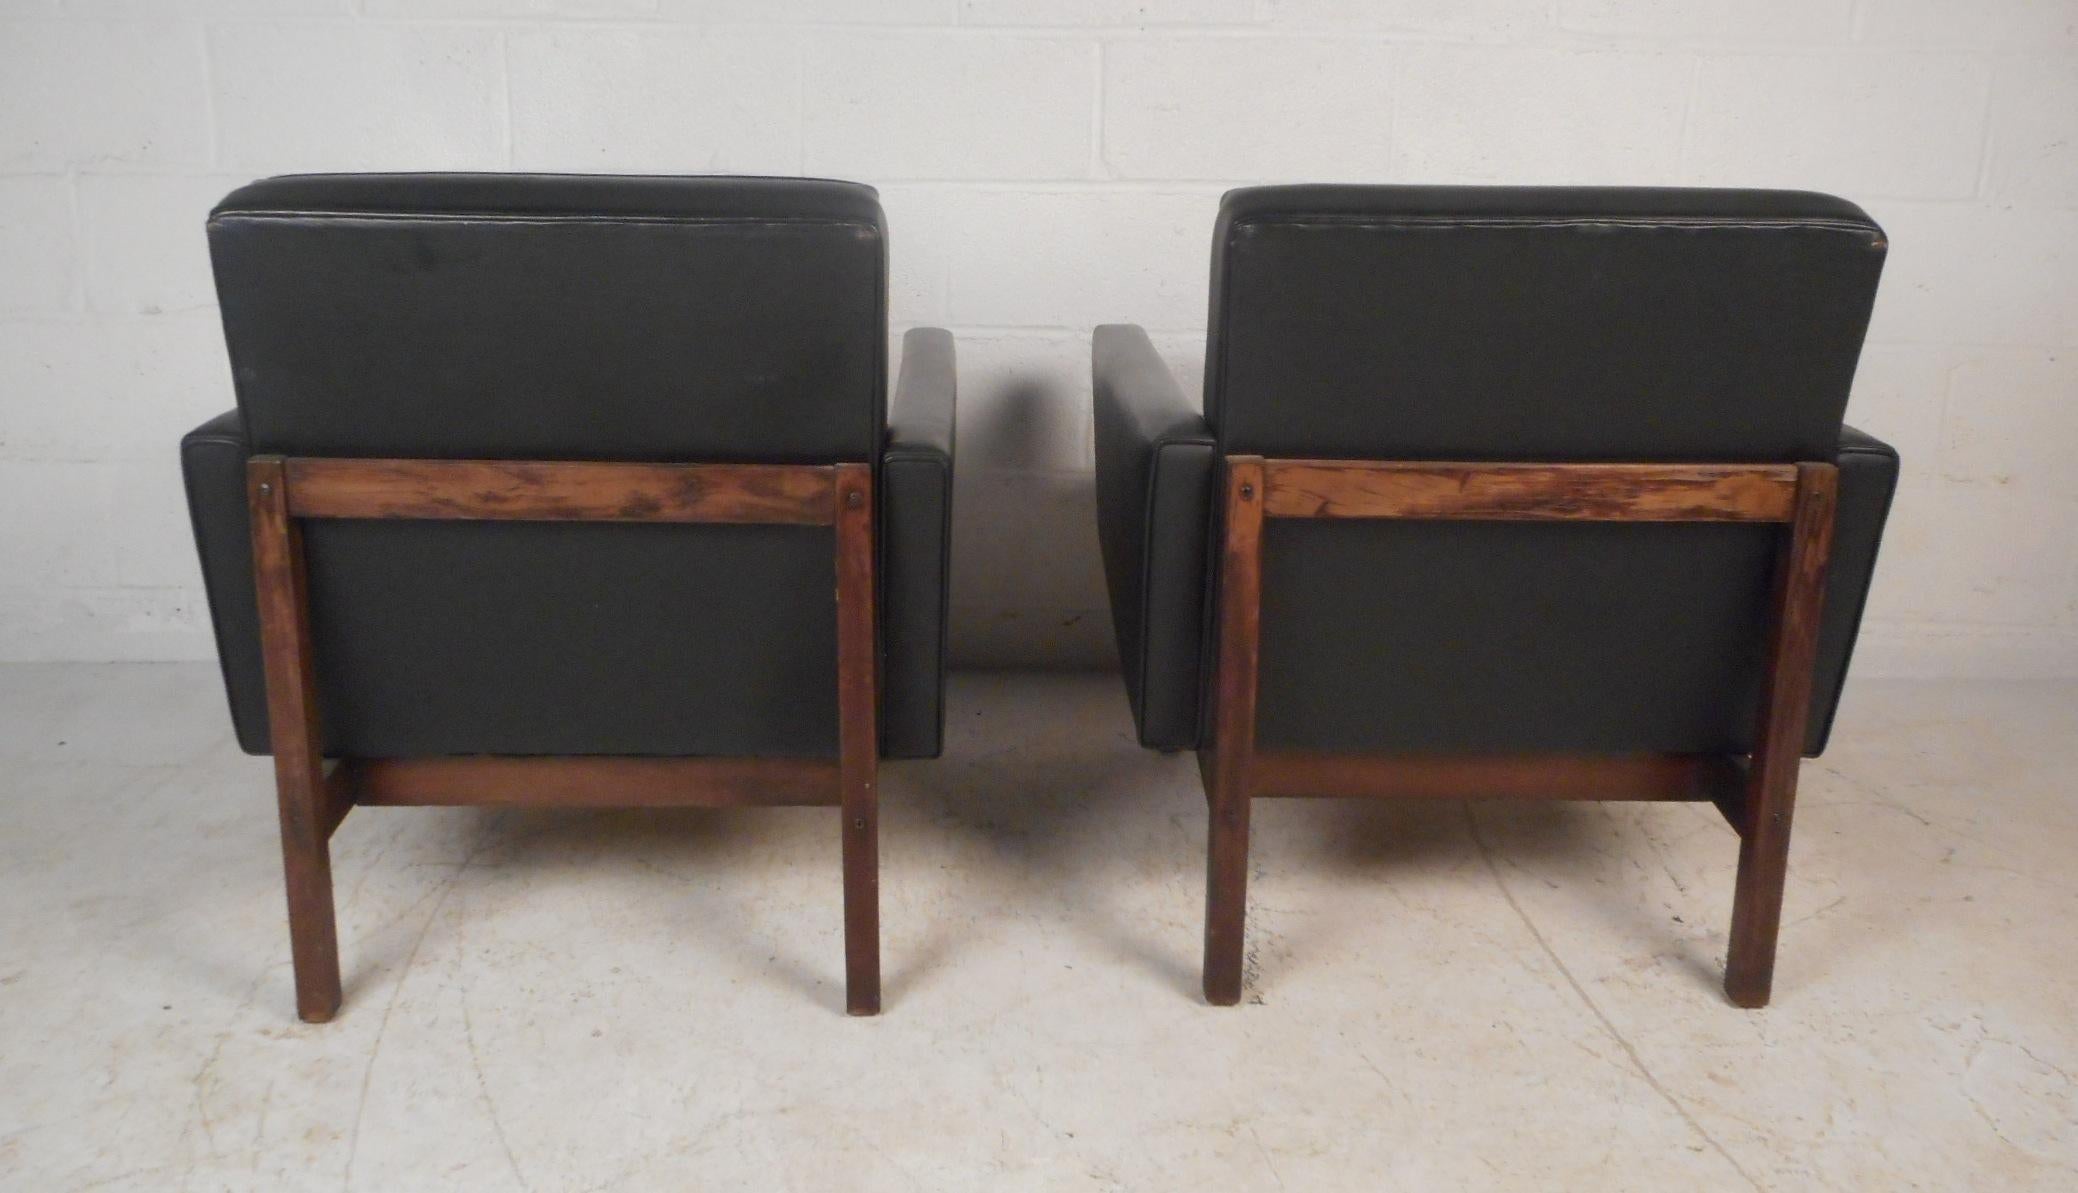 Faux Leather Pair of Mid-Century Modern Club Chairs